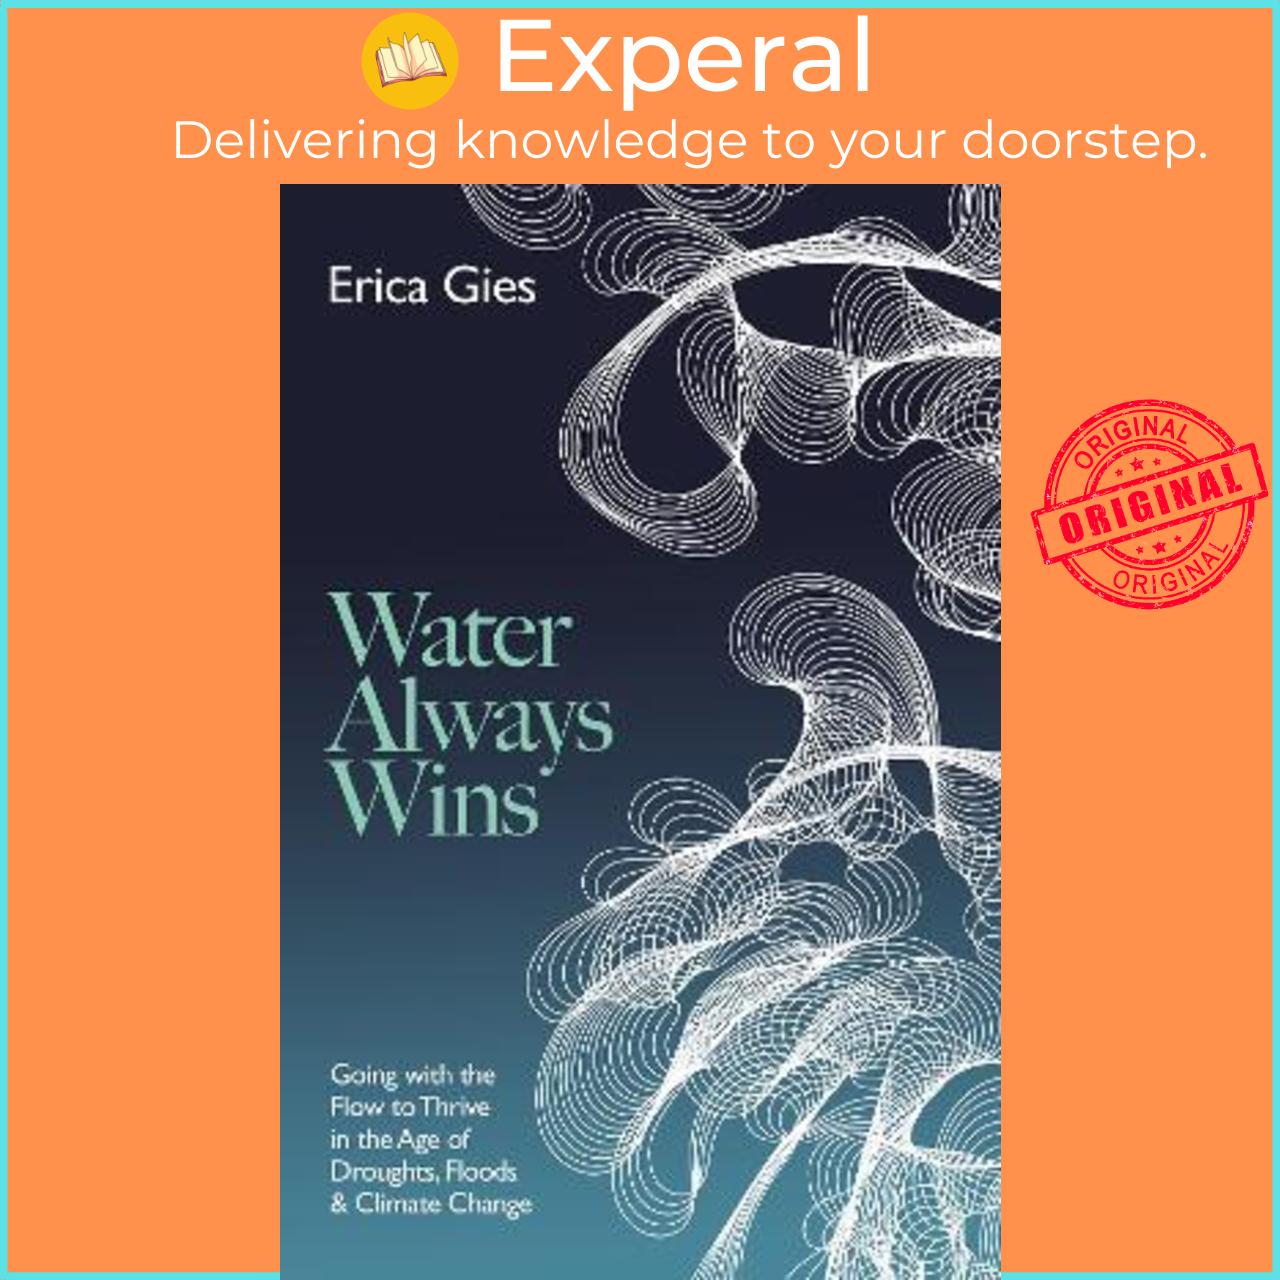 Sách - Water Always Wins : Thriving in an Age of Drought and Deluge by Erica Gies (UK edition, hardcover)